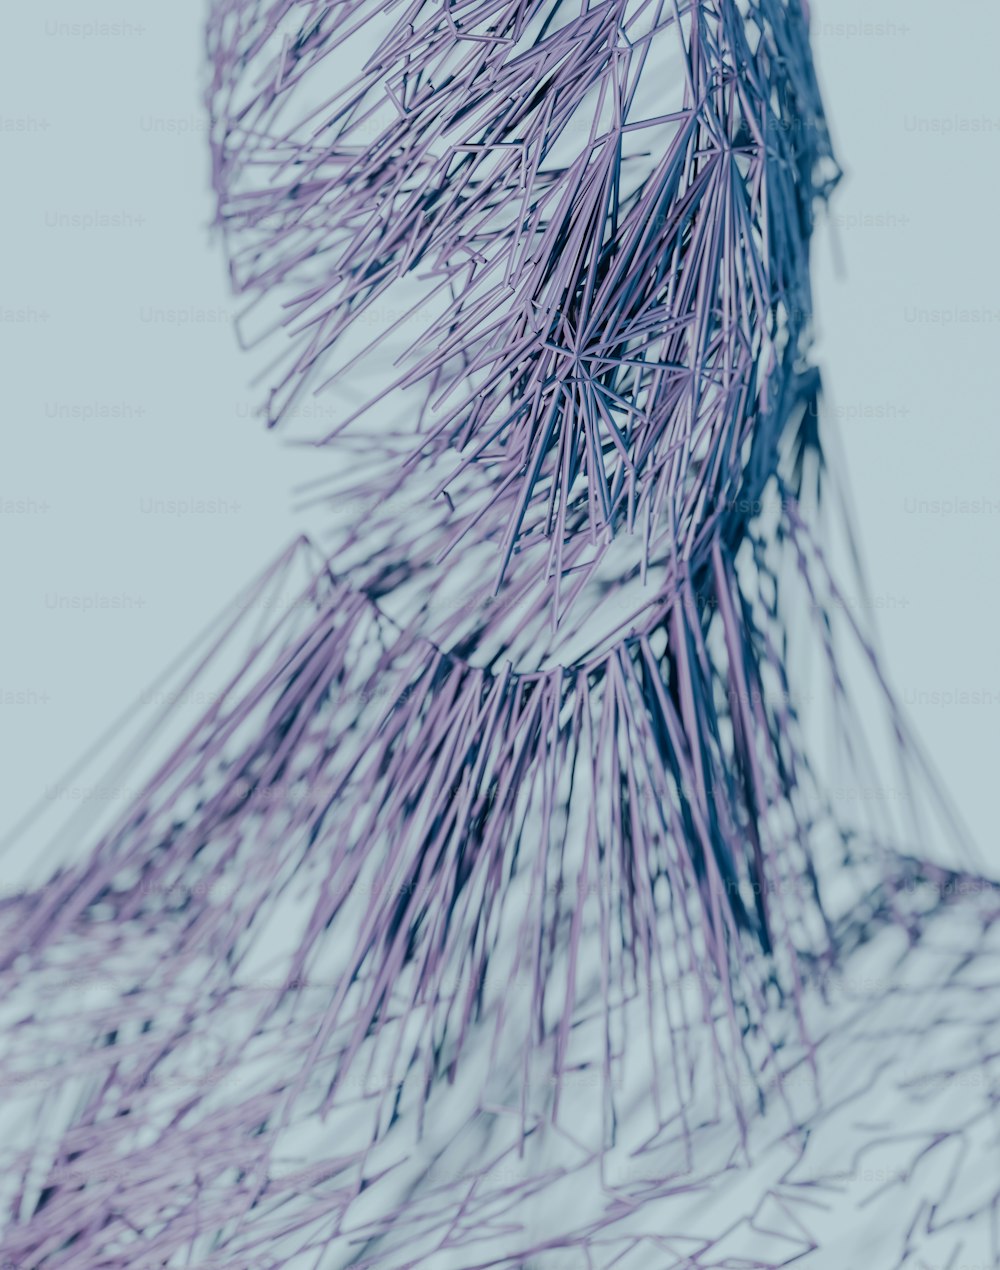 a wire sculpture of a person's head and neck